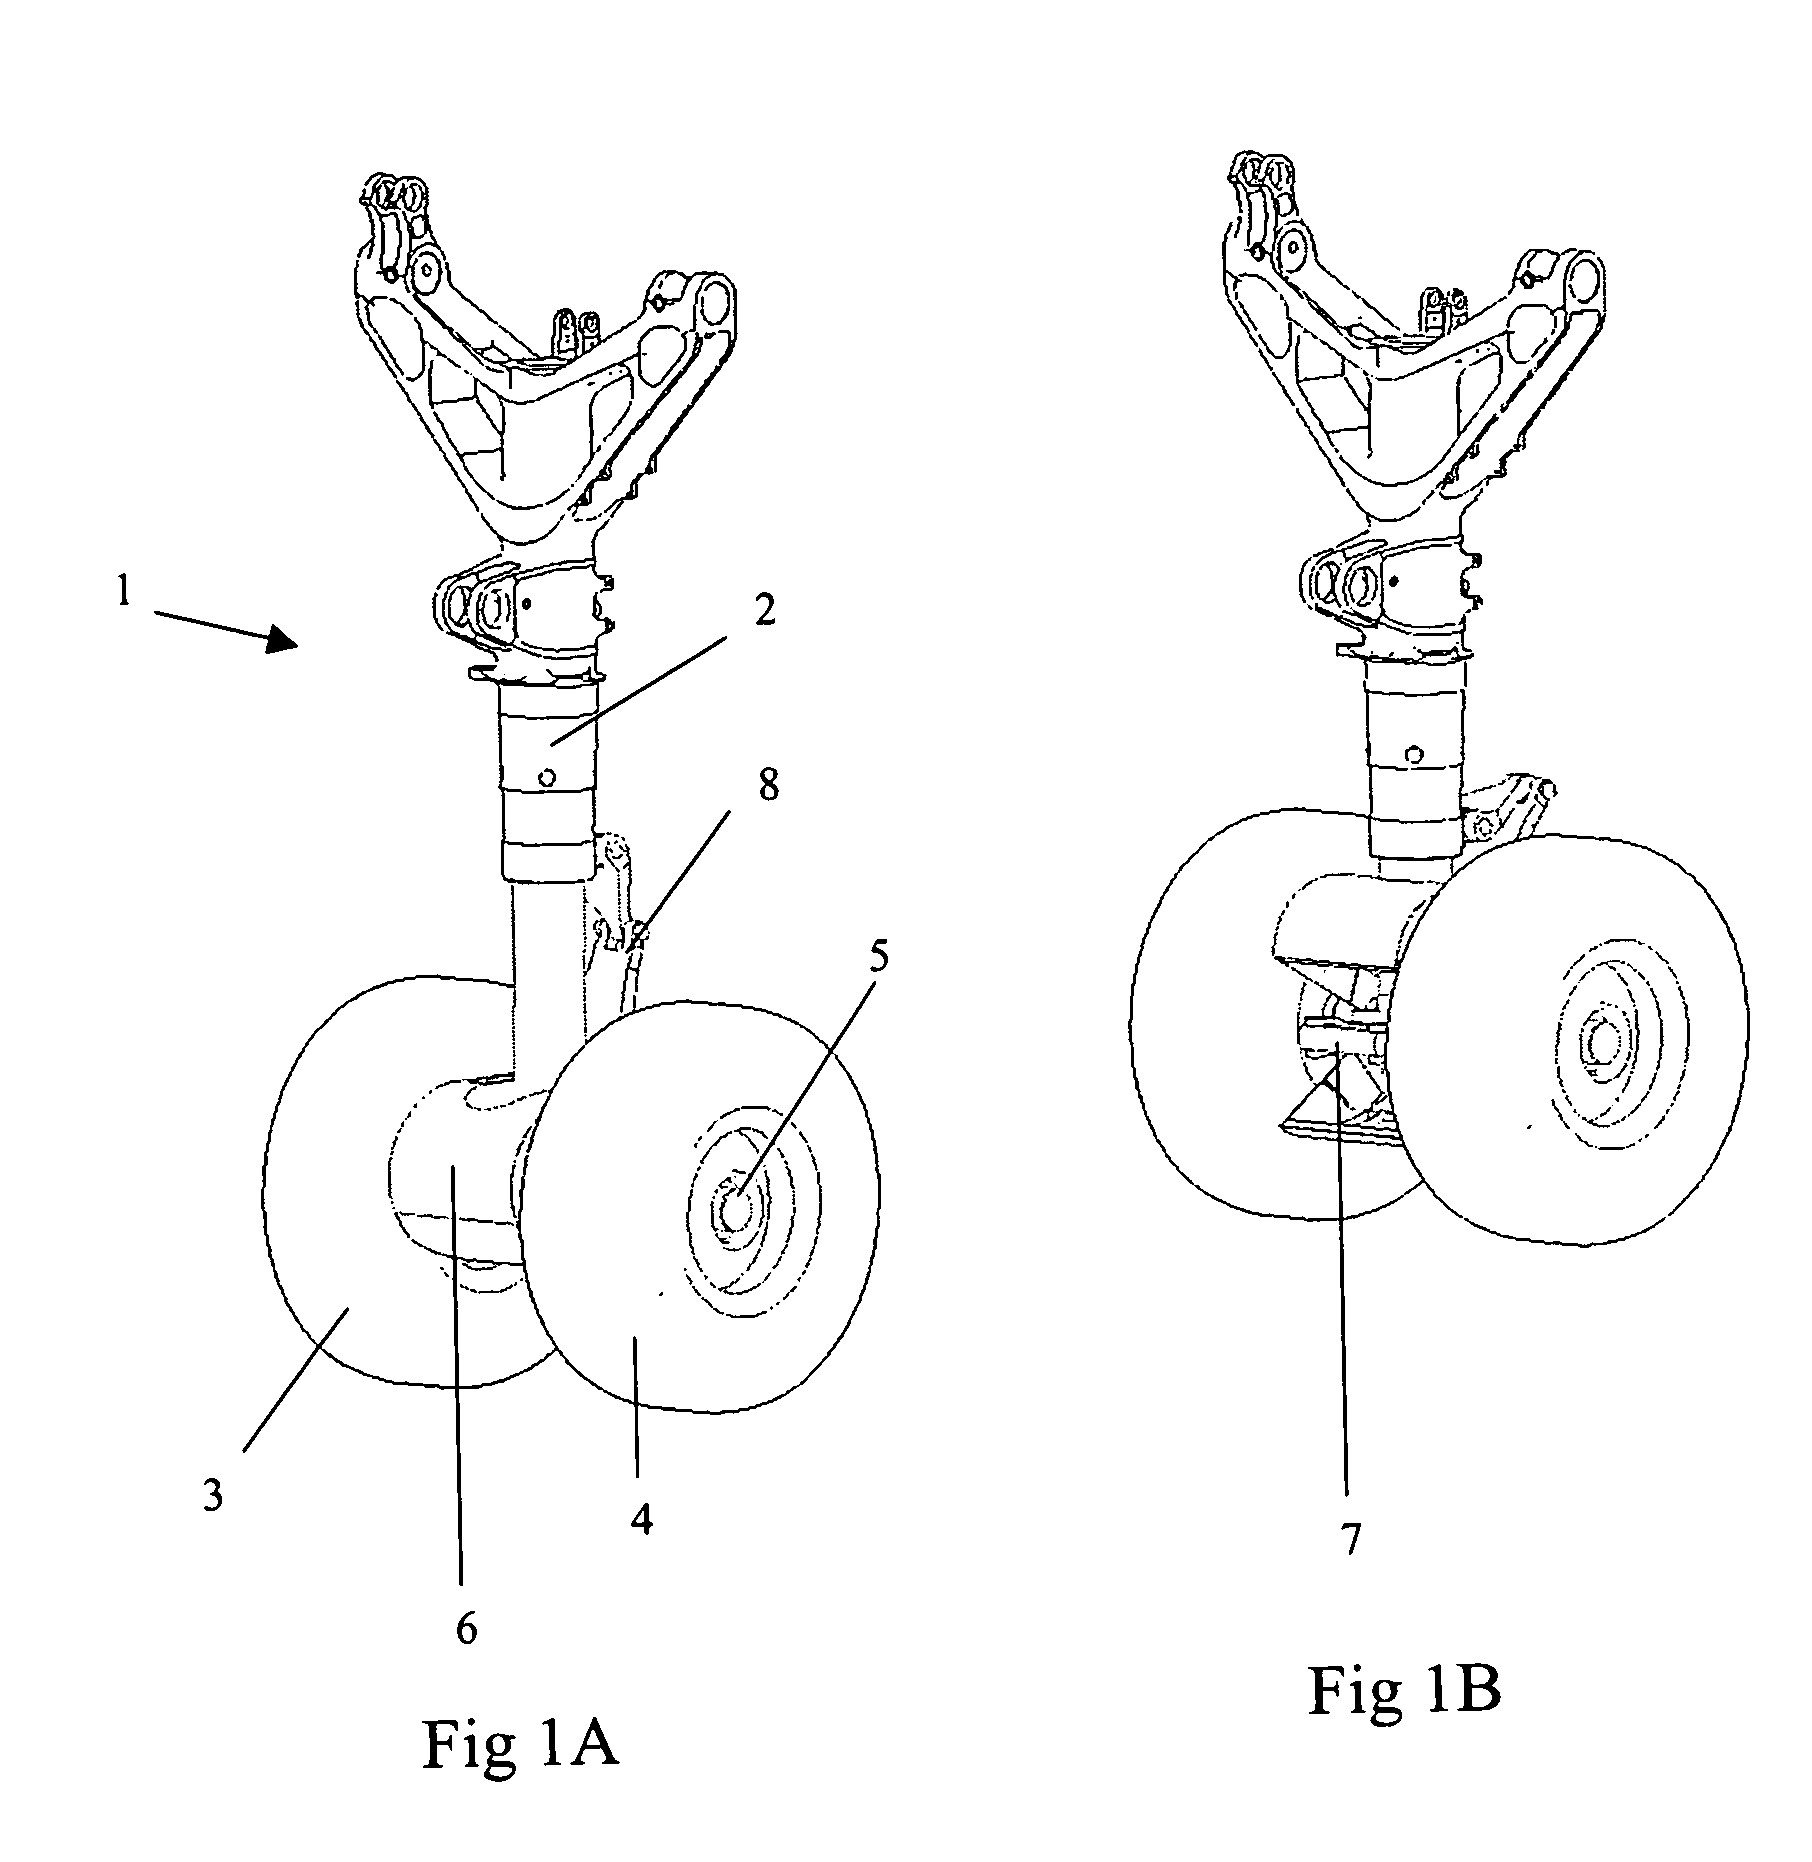 Aircraft noise reduction apparatus